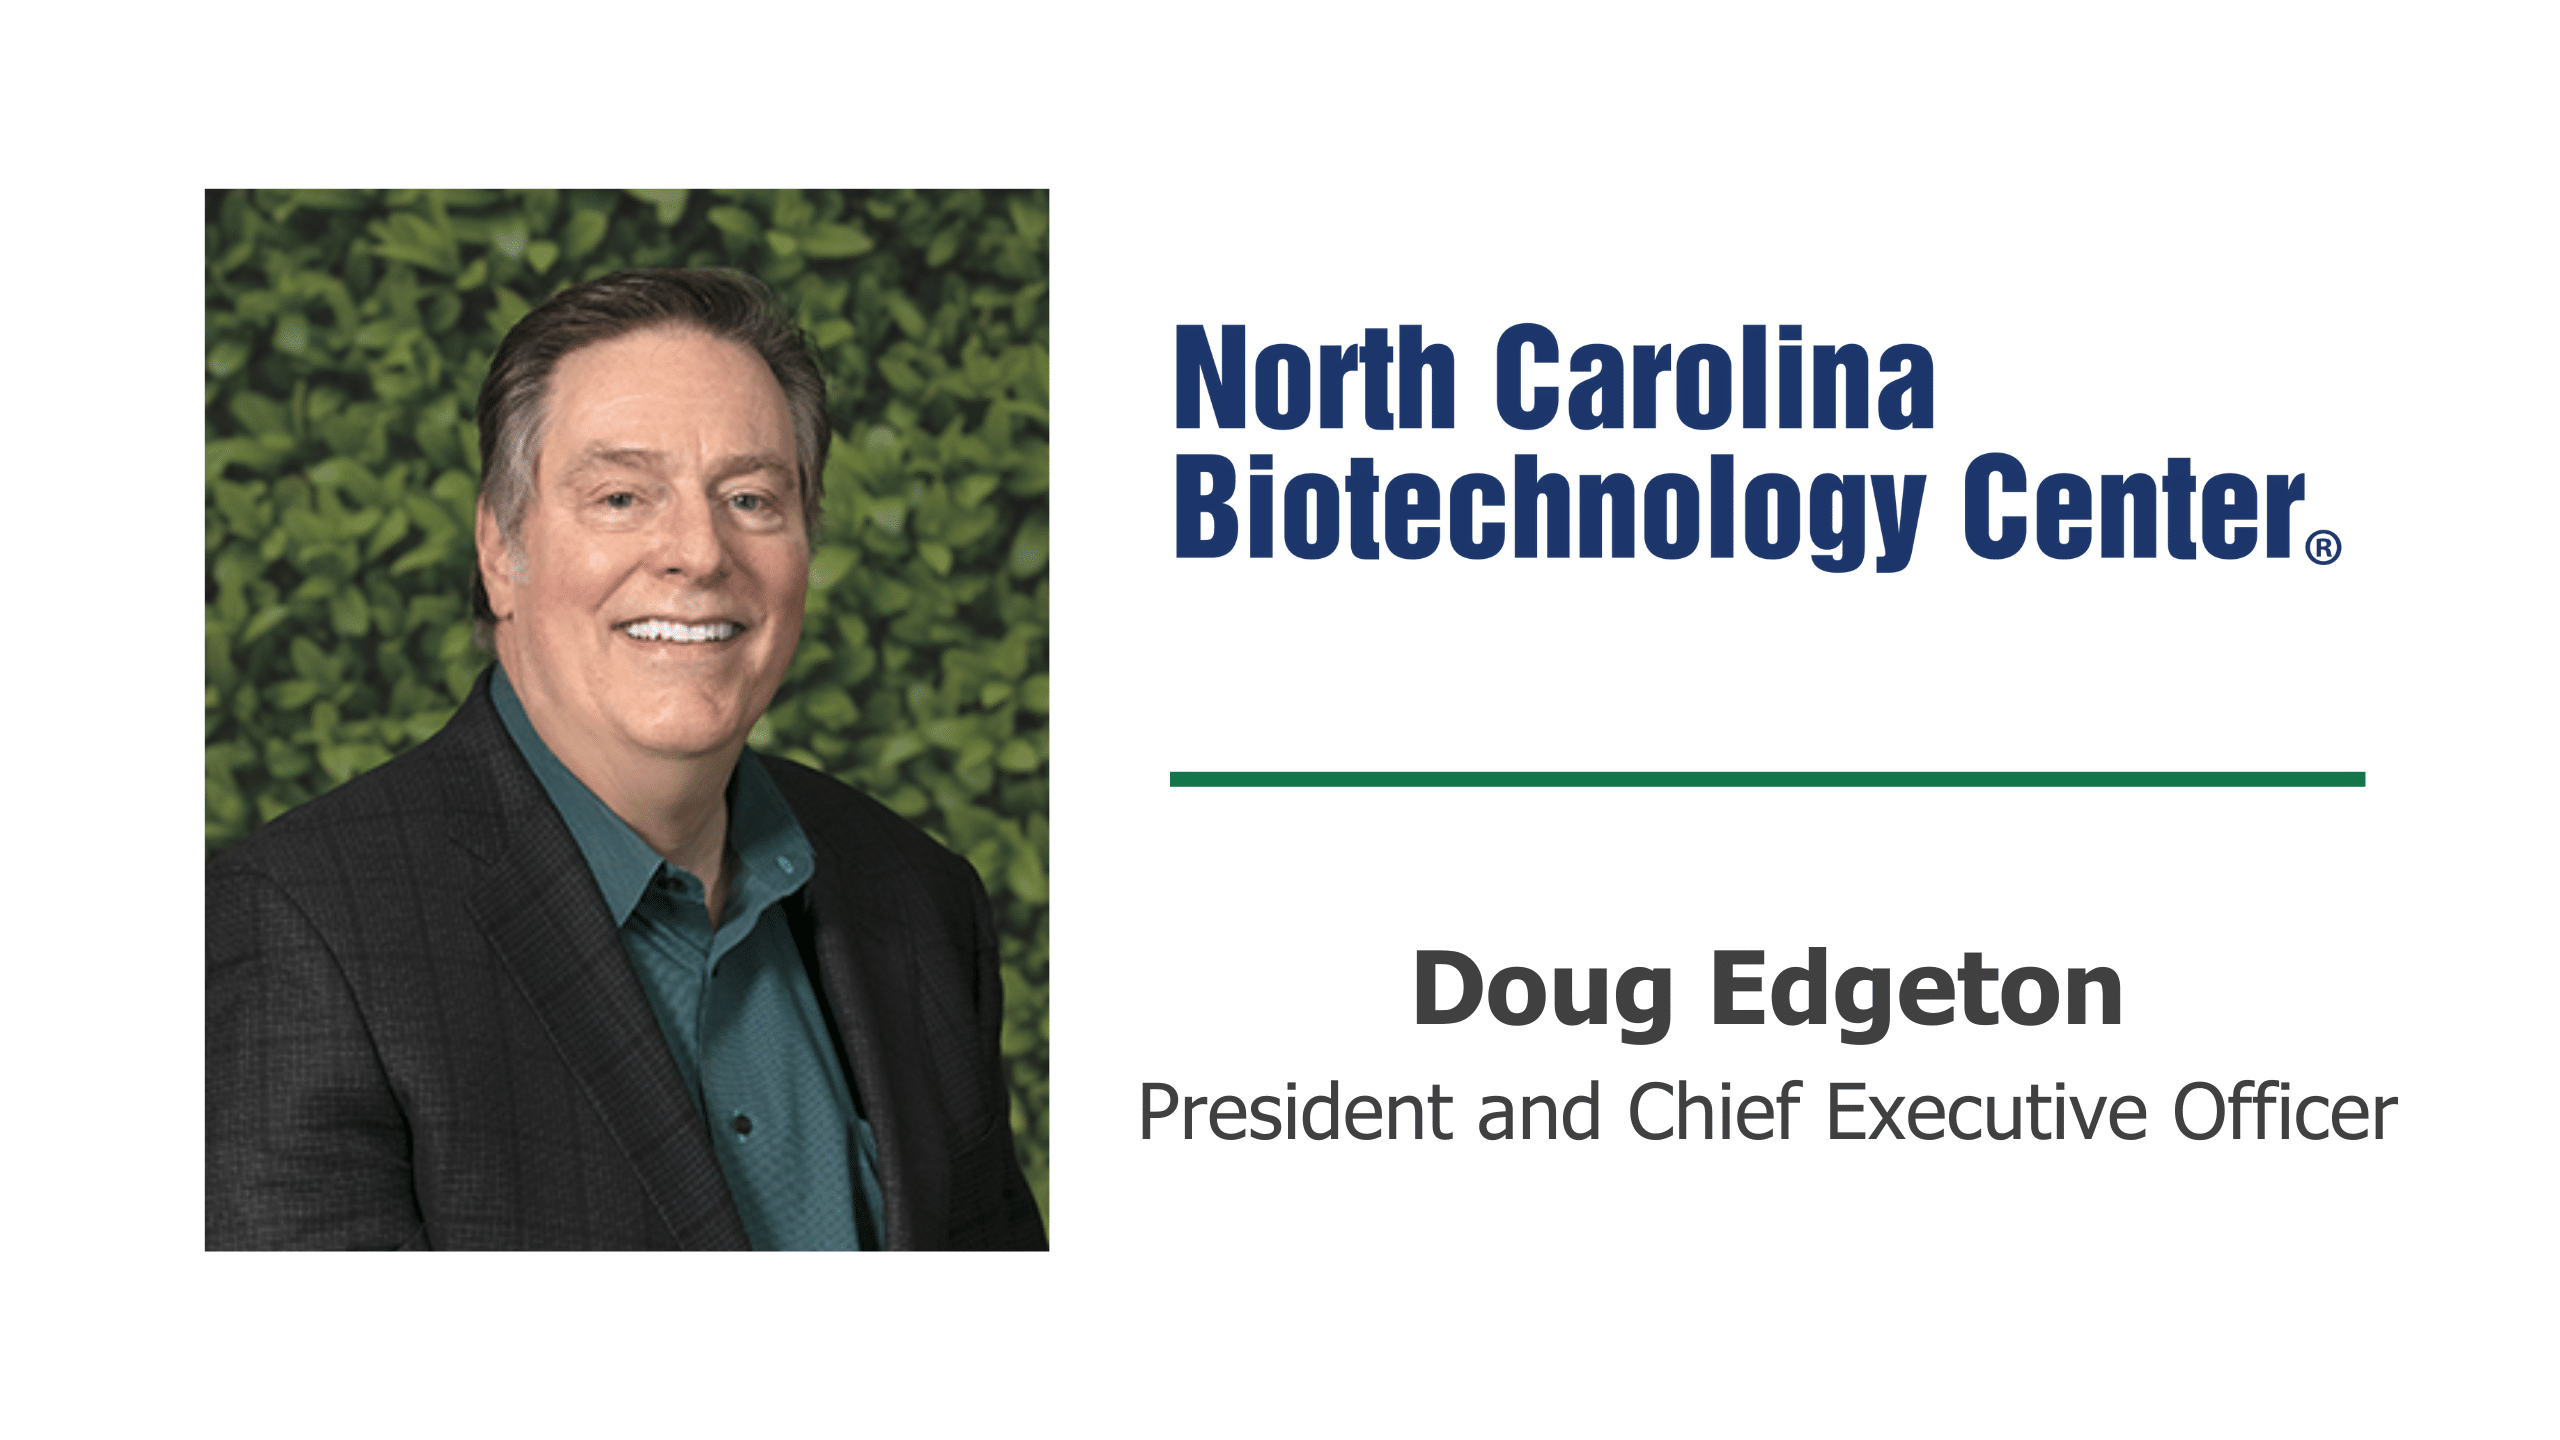 Critical Conversations with Scott T. Hamilton featuring NCBiotech’s President and Chief Executive Officer Doug Edgeton